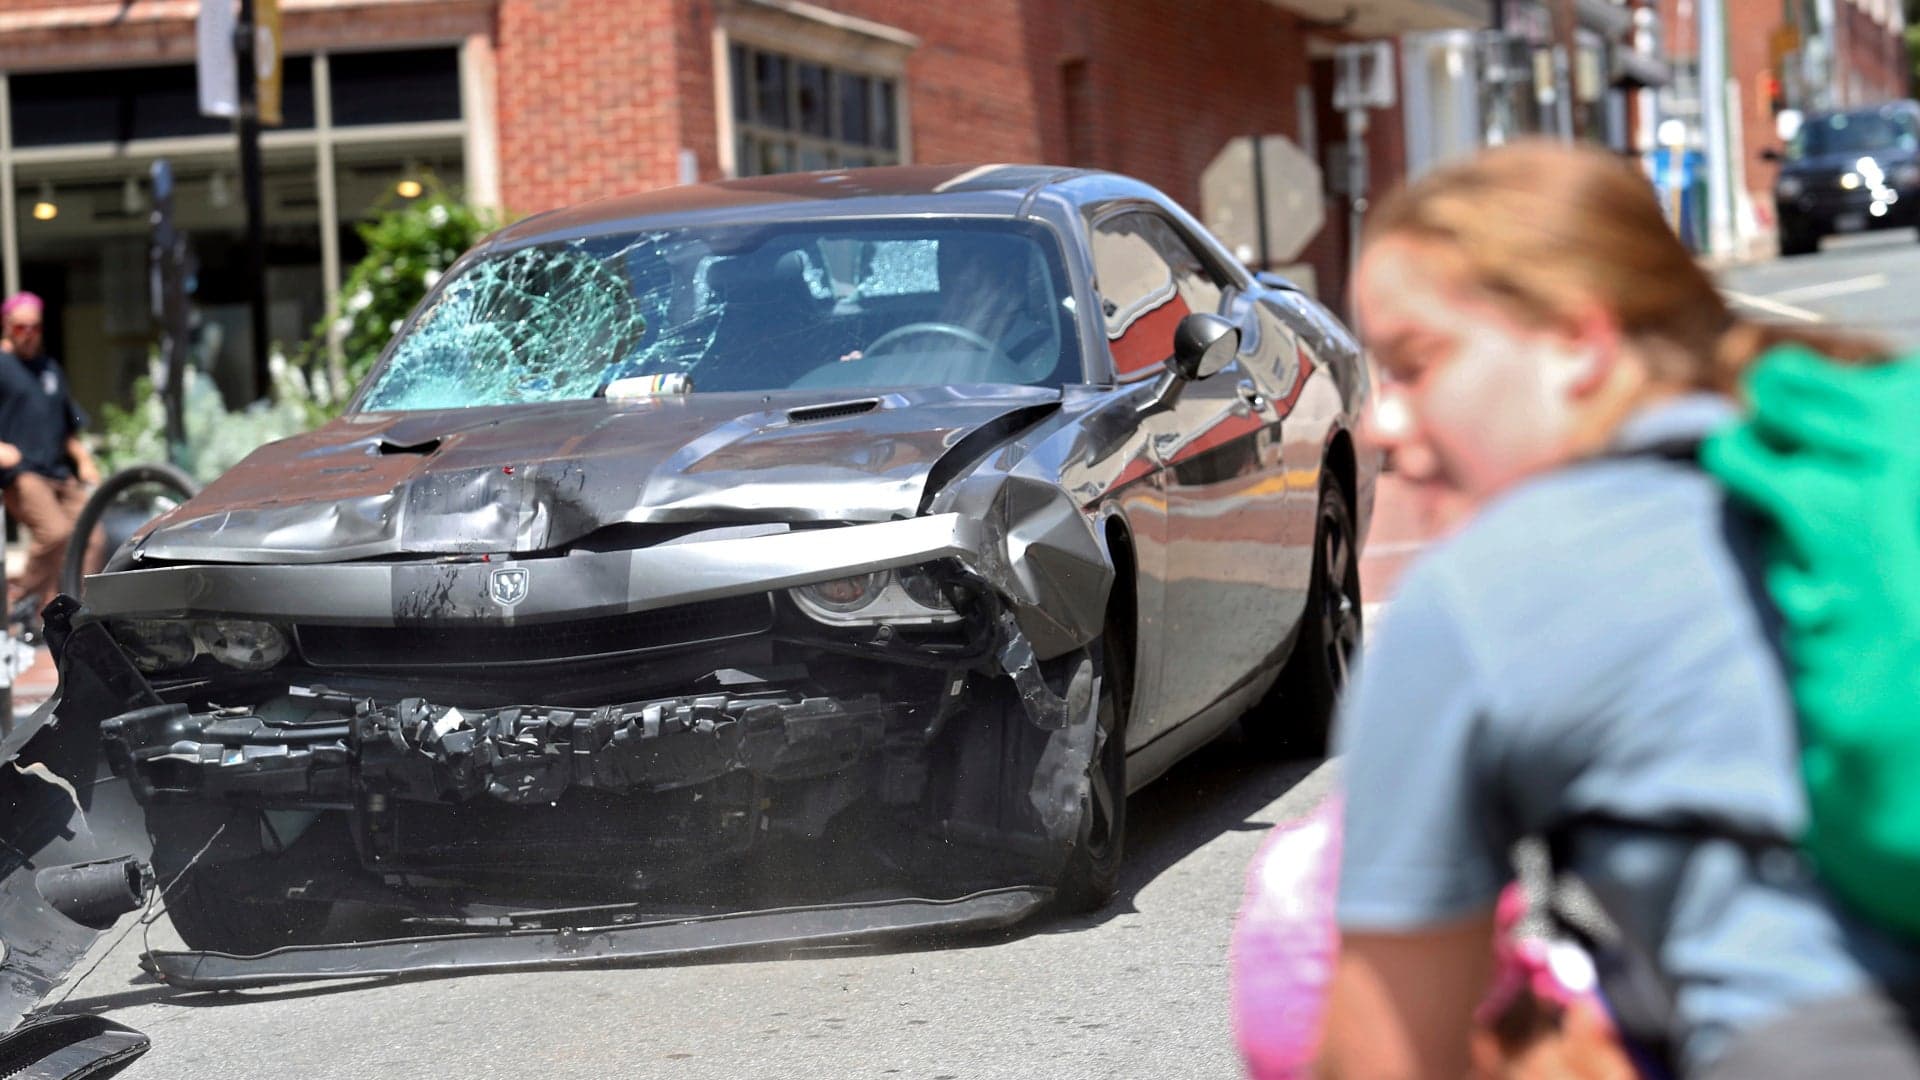 North Carolina Shelves Bill Protecting Drivers who Hit Protesters After Charlottesville Car Attack